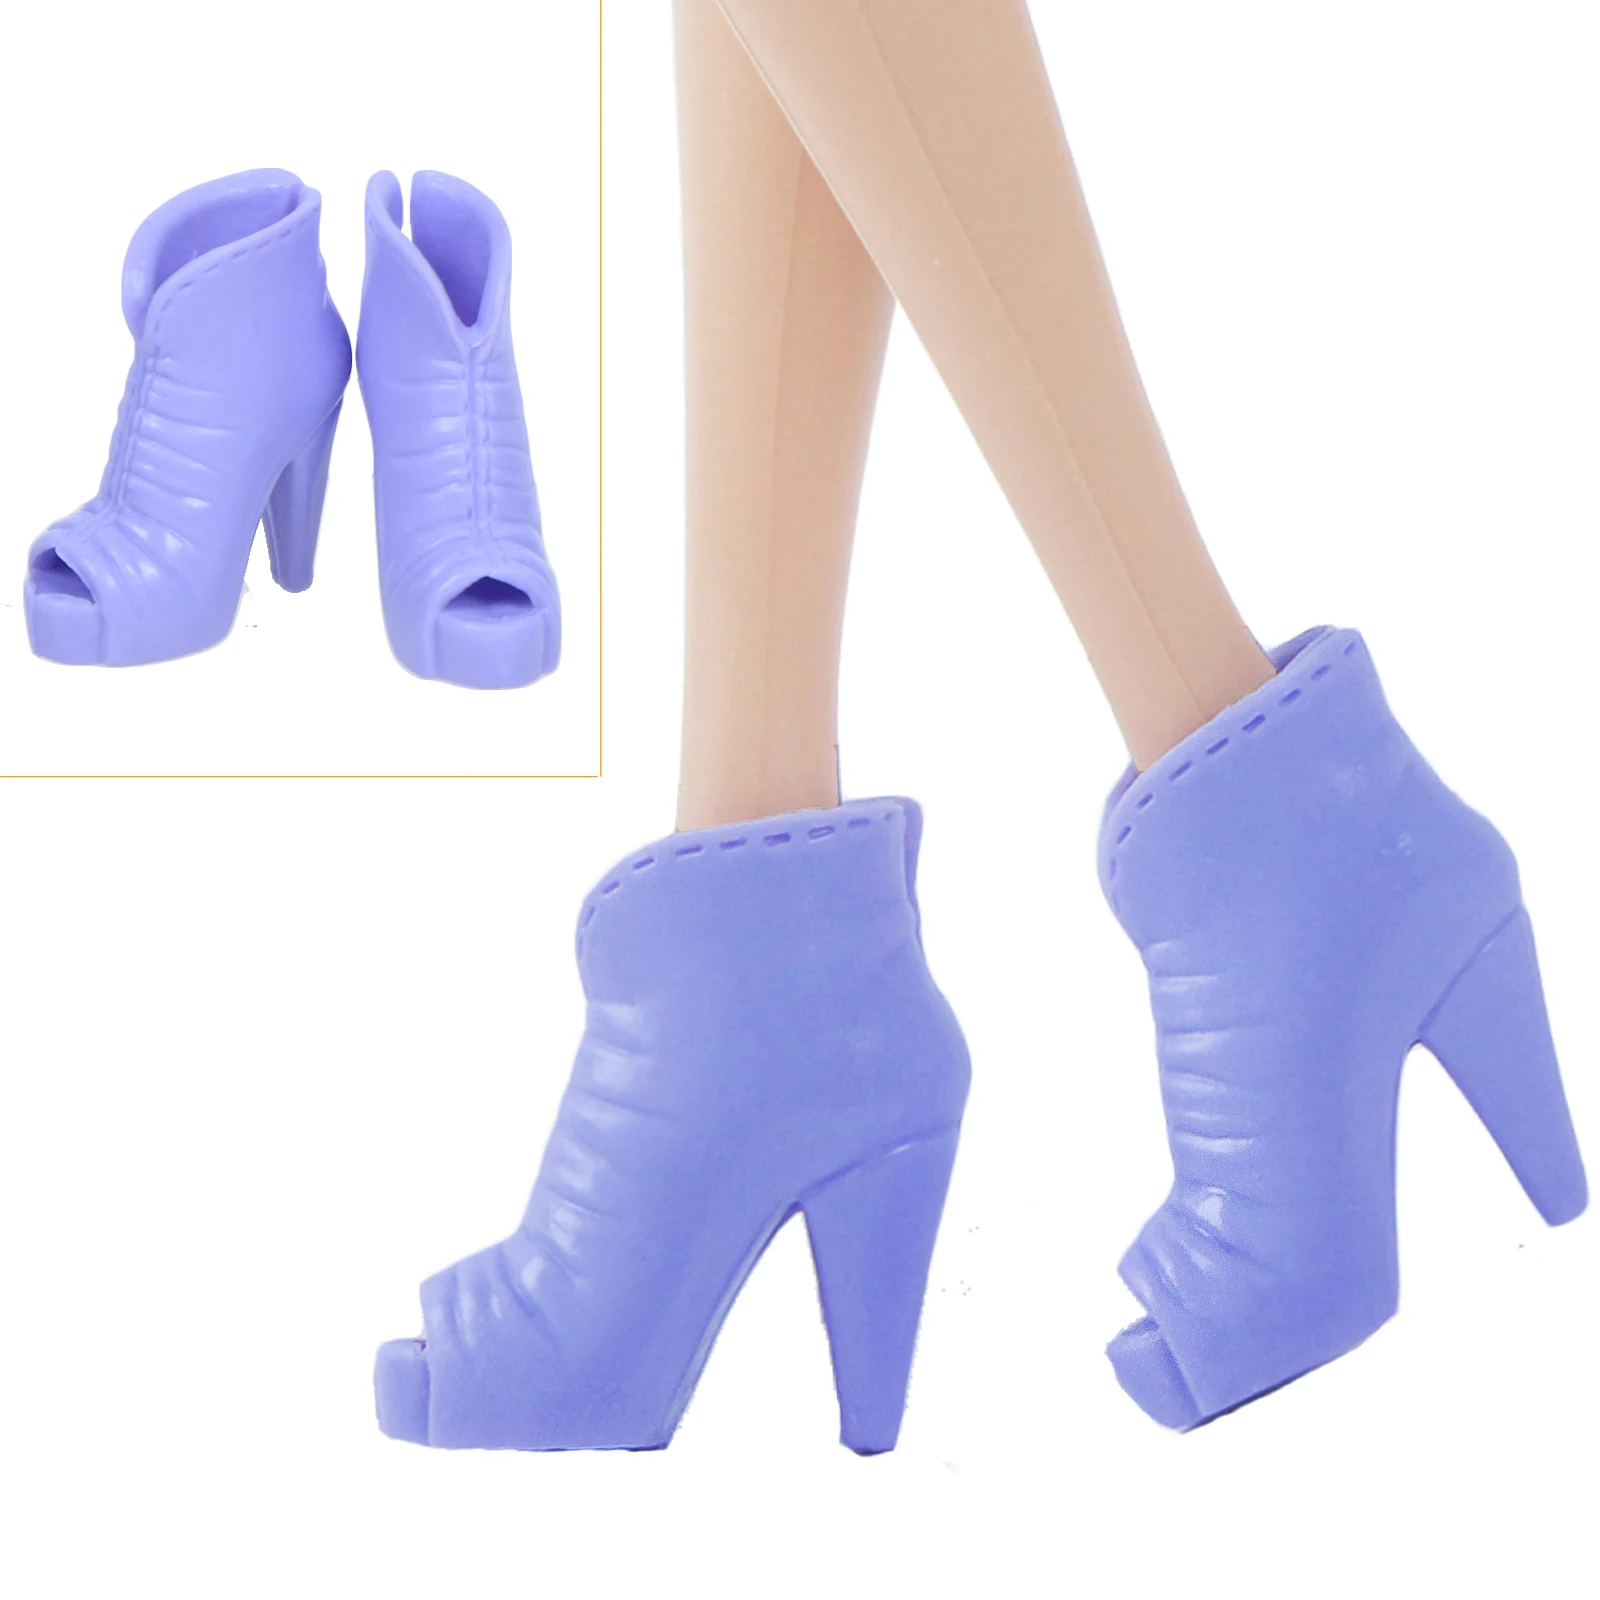 Of High Quality Barbie Doll High Chair Fashion Boots With Flats And Heels  Perfect For Dinner Parties And Special Occasions From Xuan08, $11.04 |  DHgate.Com